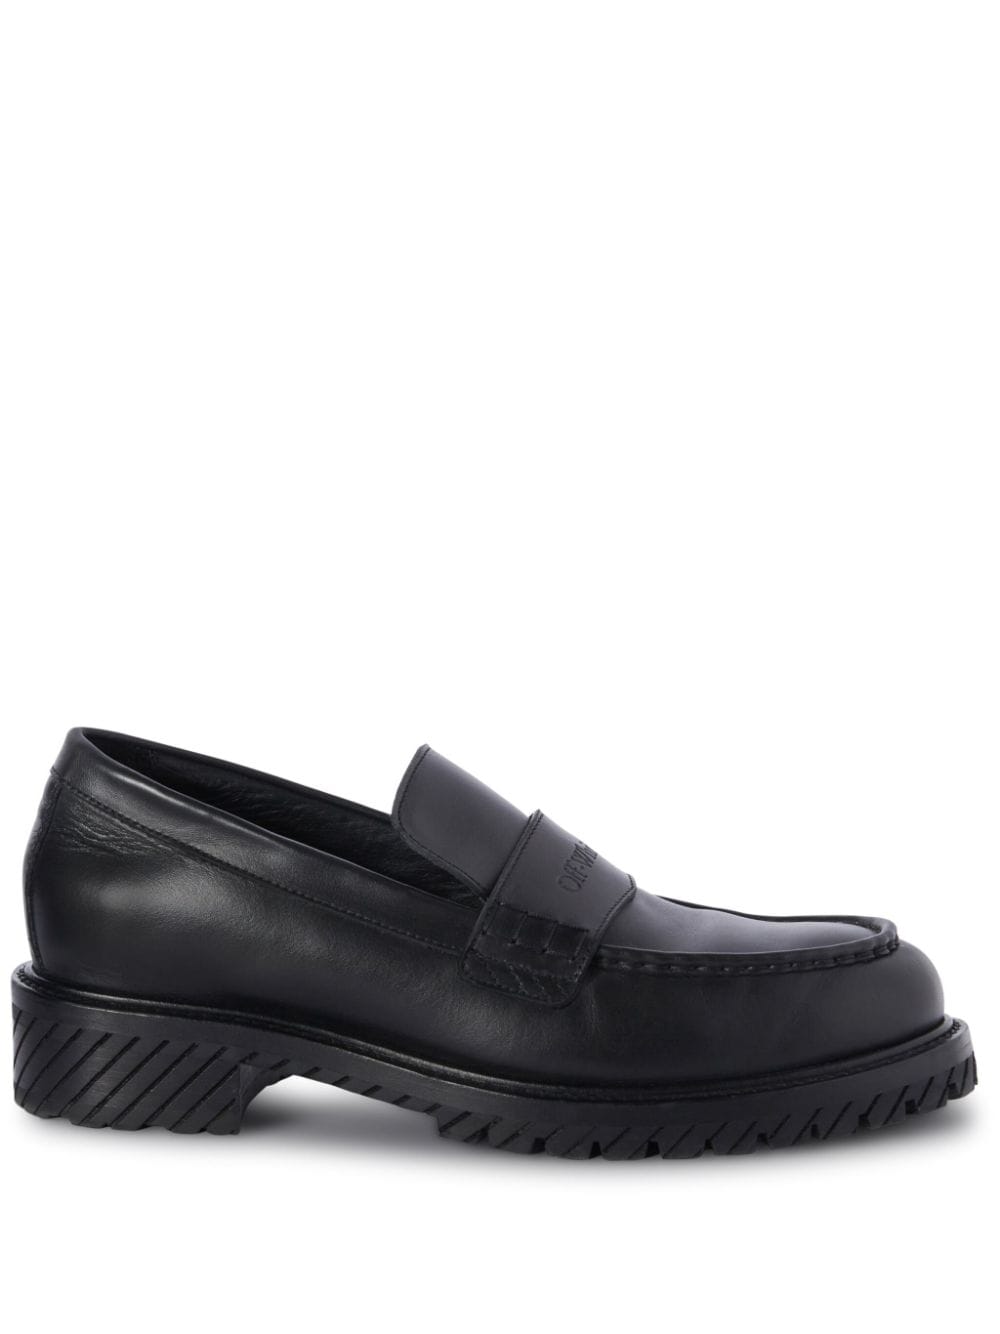 OFF-WHITE Black Military Leather Loafers for Men